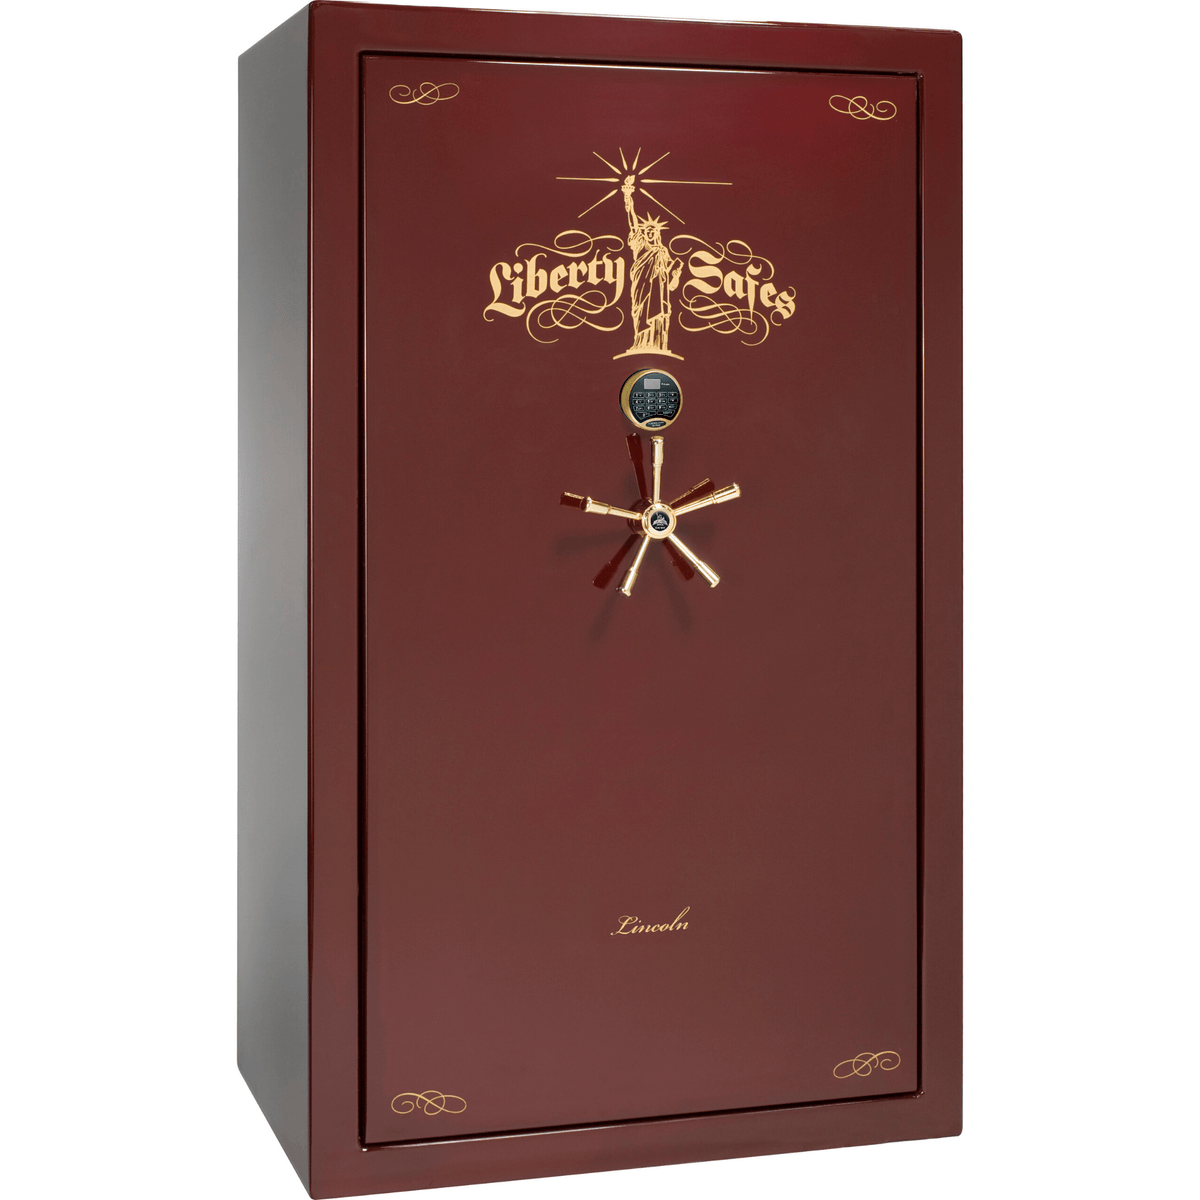 Liberty Lincoln 50 Safe in Burgundy Gloss with Brass Electronic Lock.